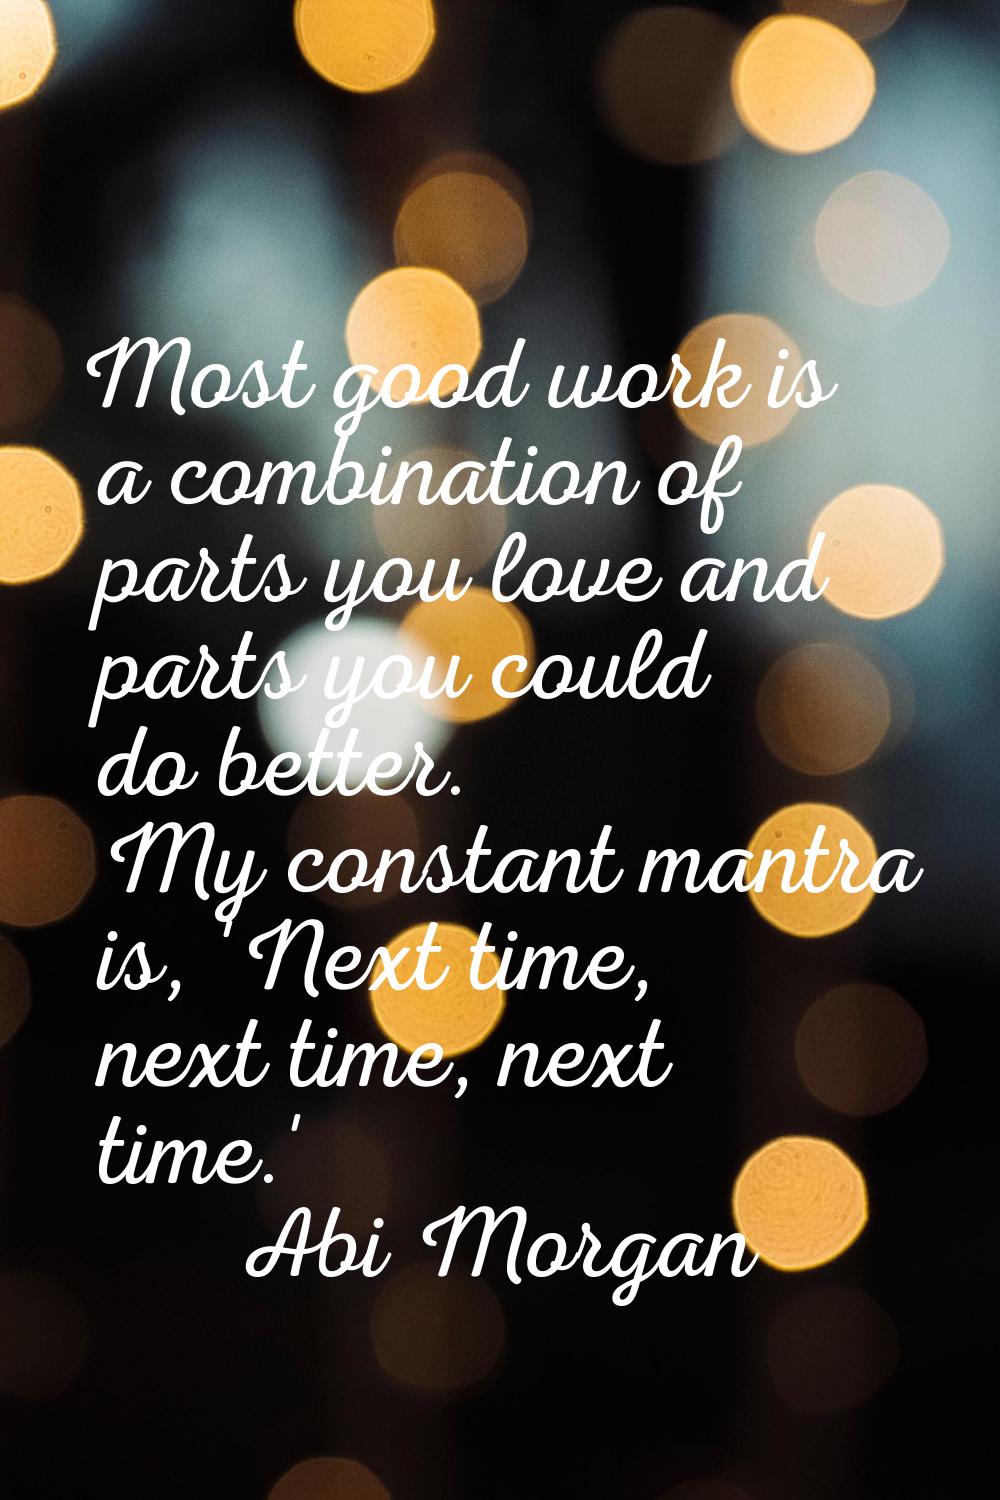 Most good work is a combination of parts you love and parts you could do better. My constant mantra